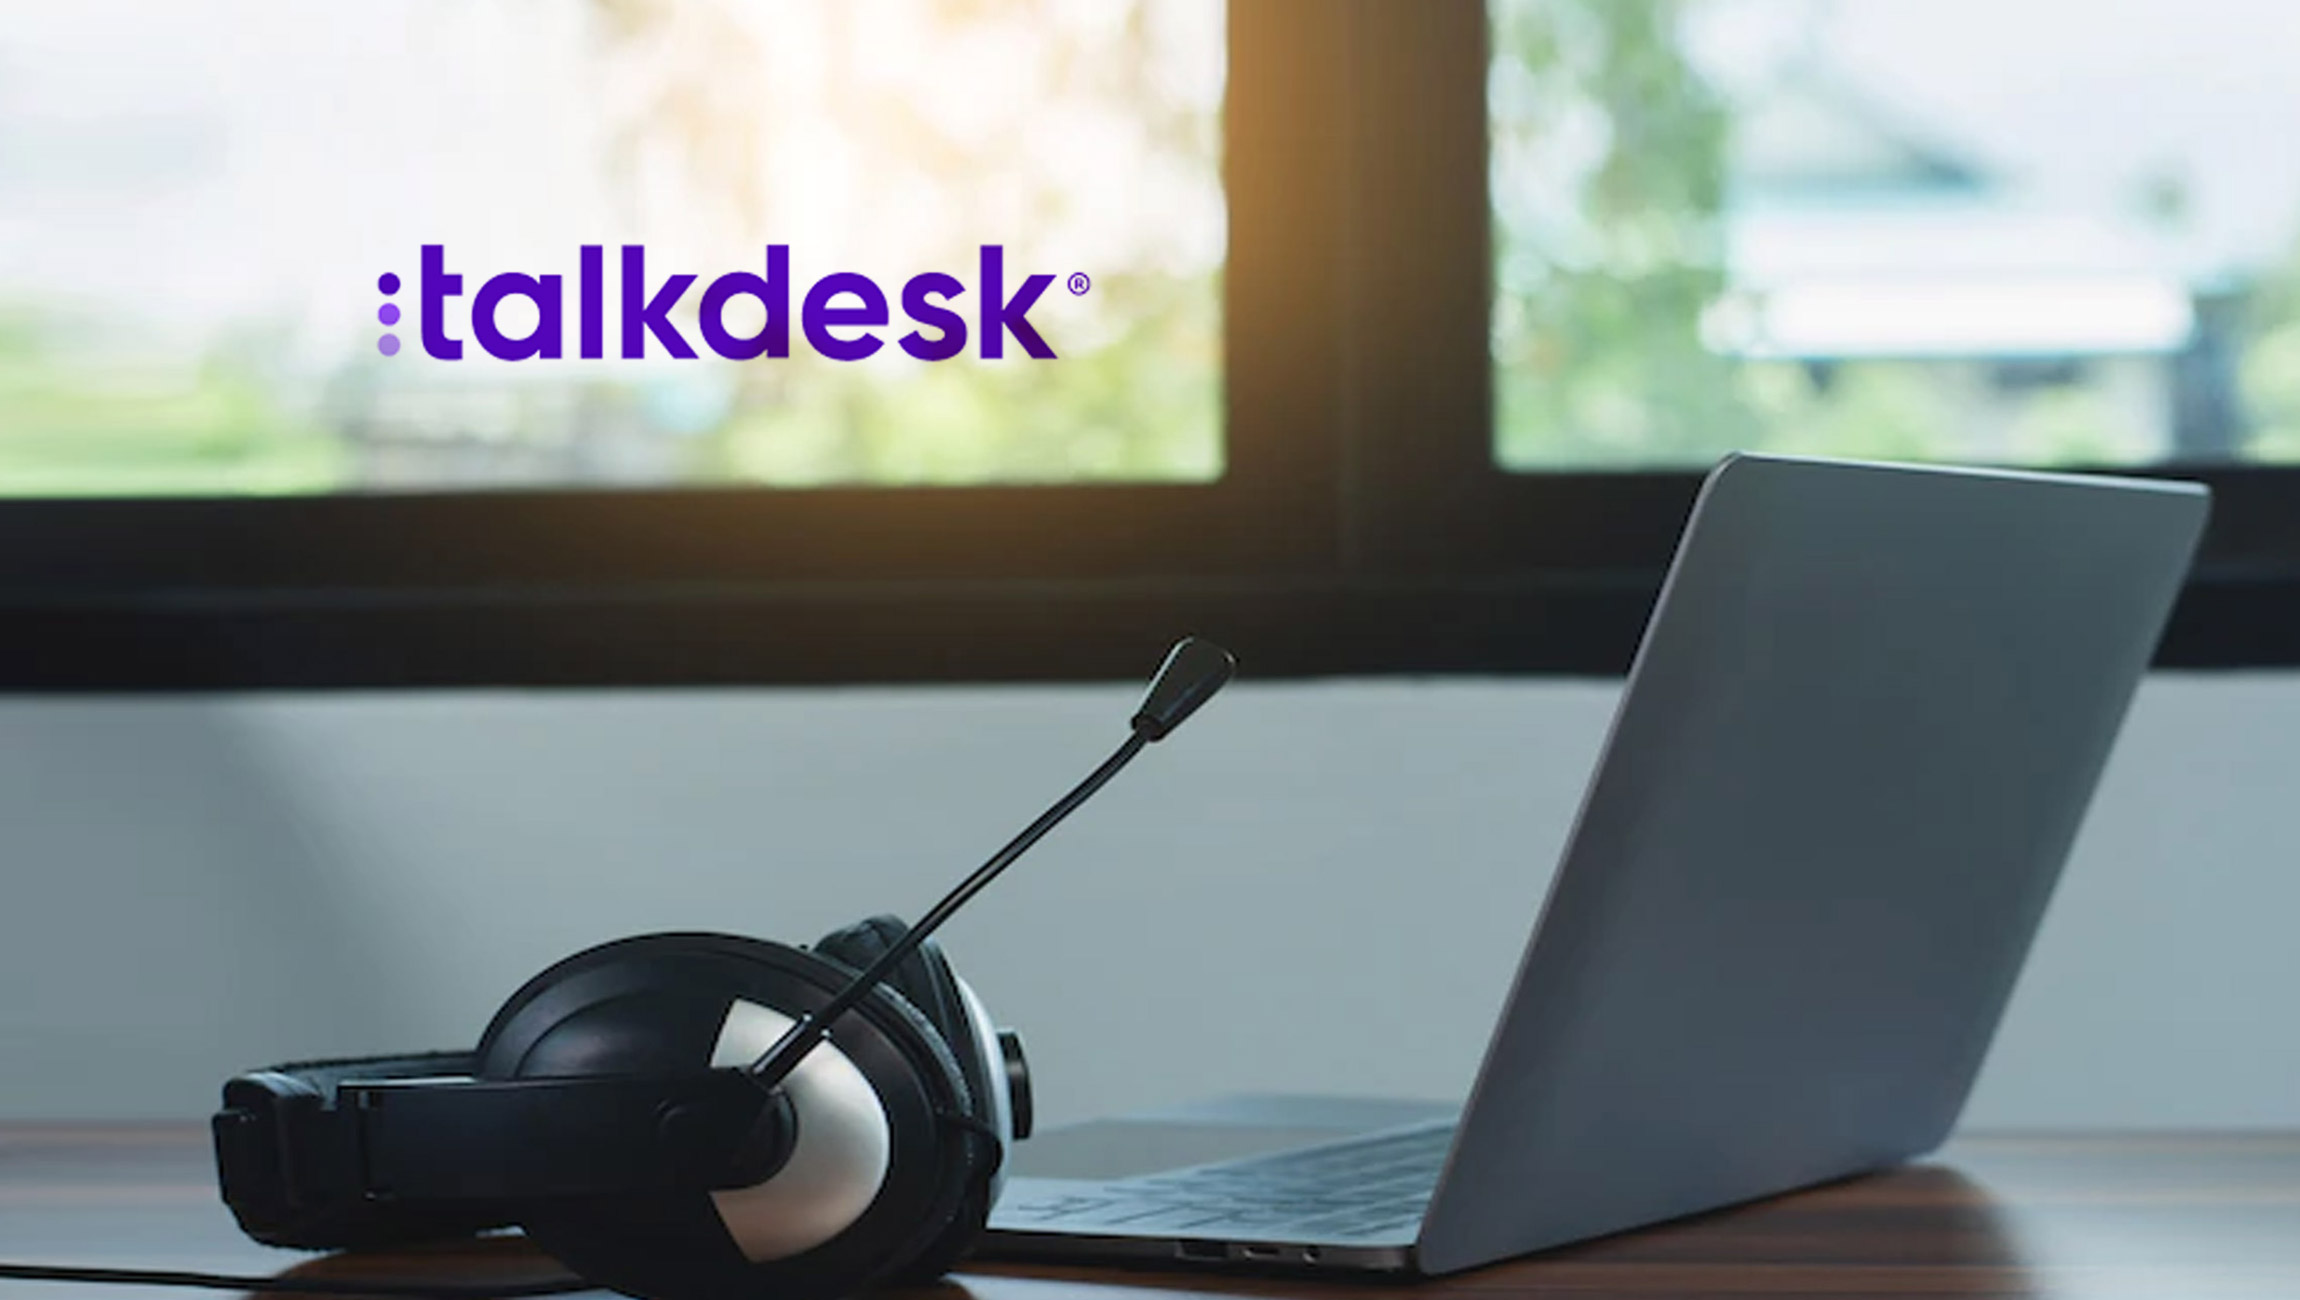 Talkdesk Introduces New Industry-Specific Solution: Talkdesk Retail Experience Cloud